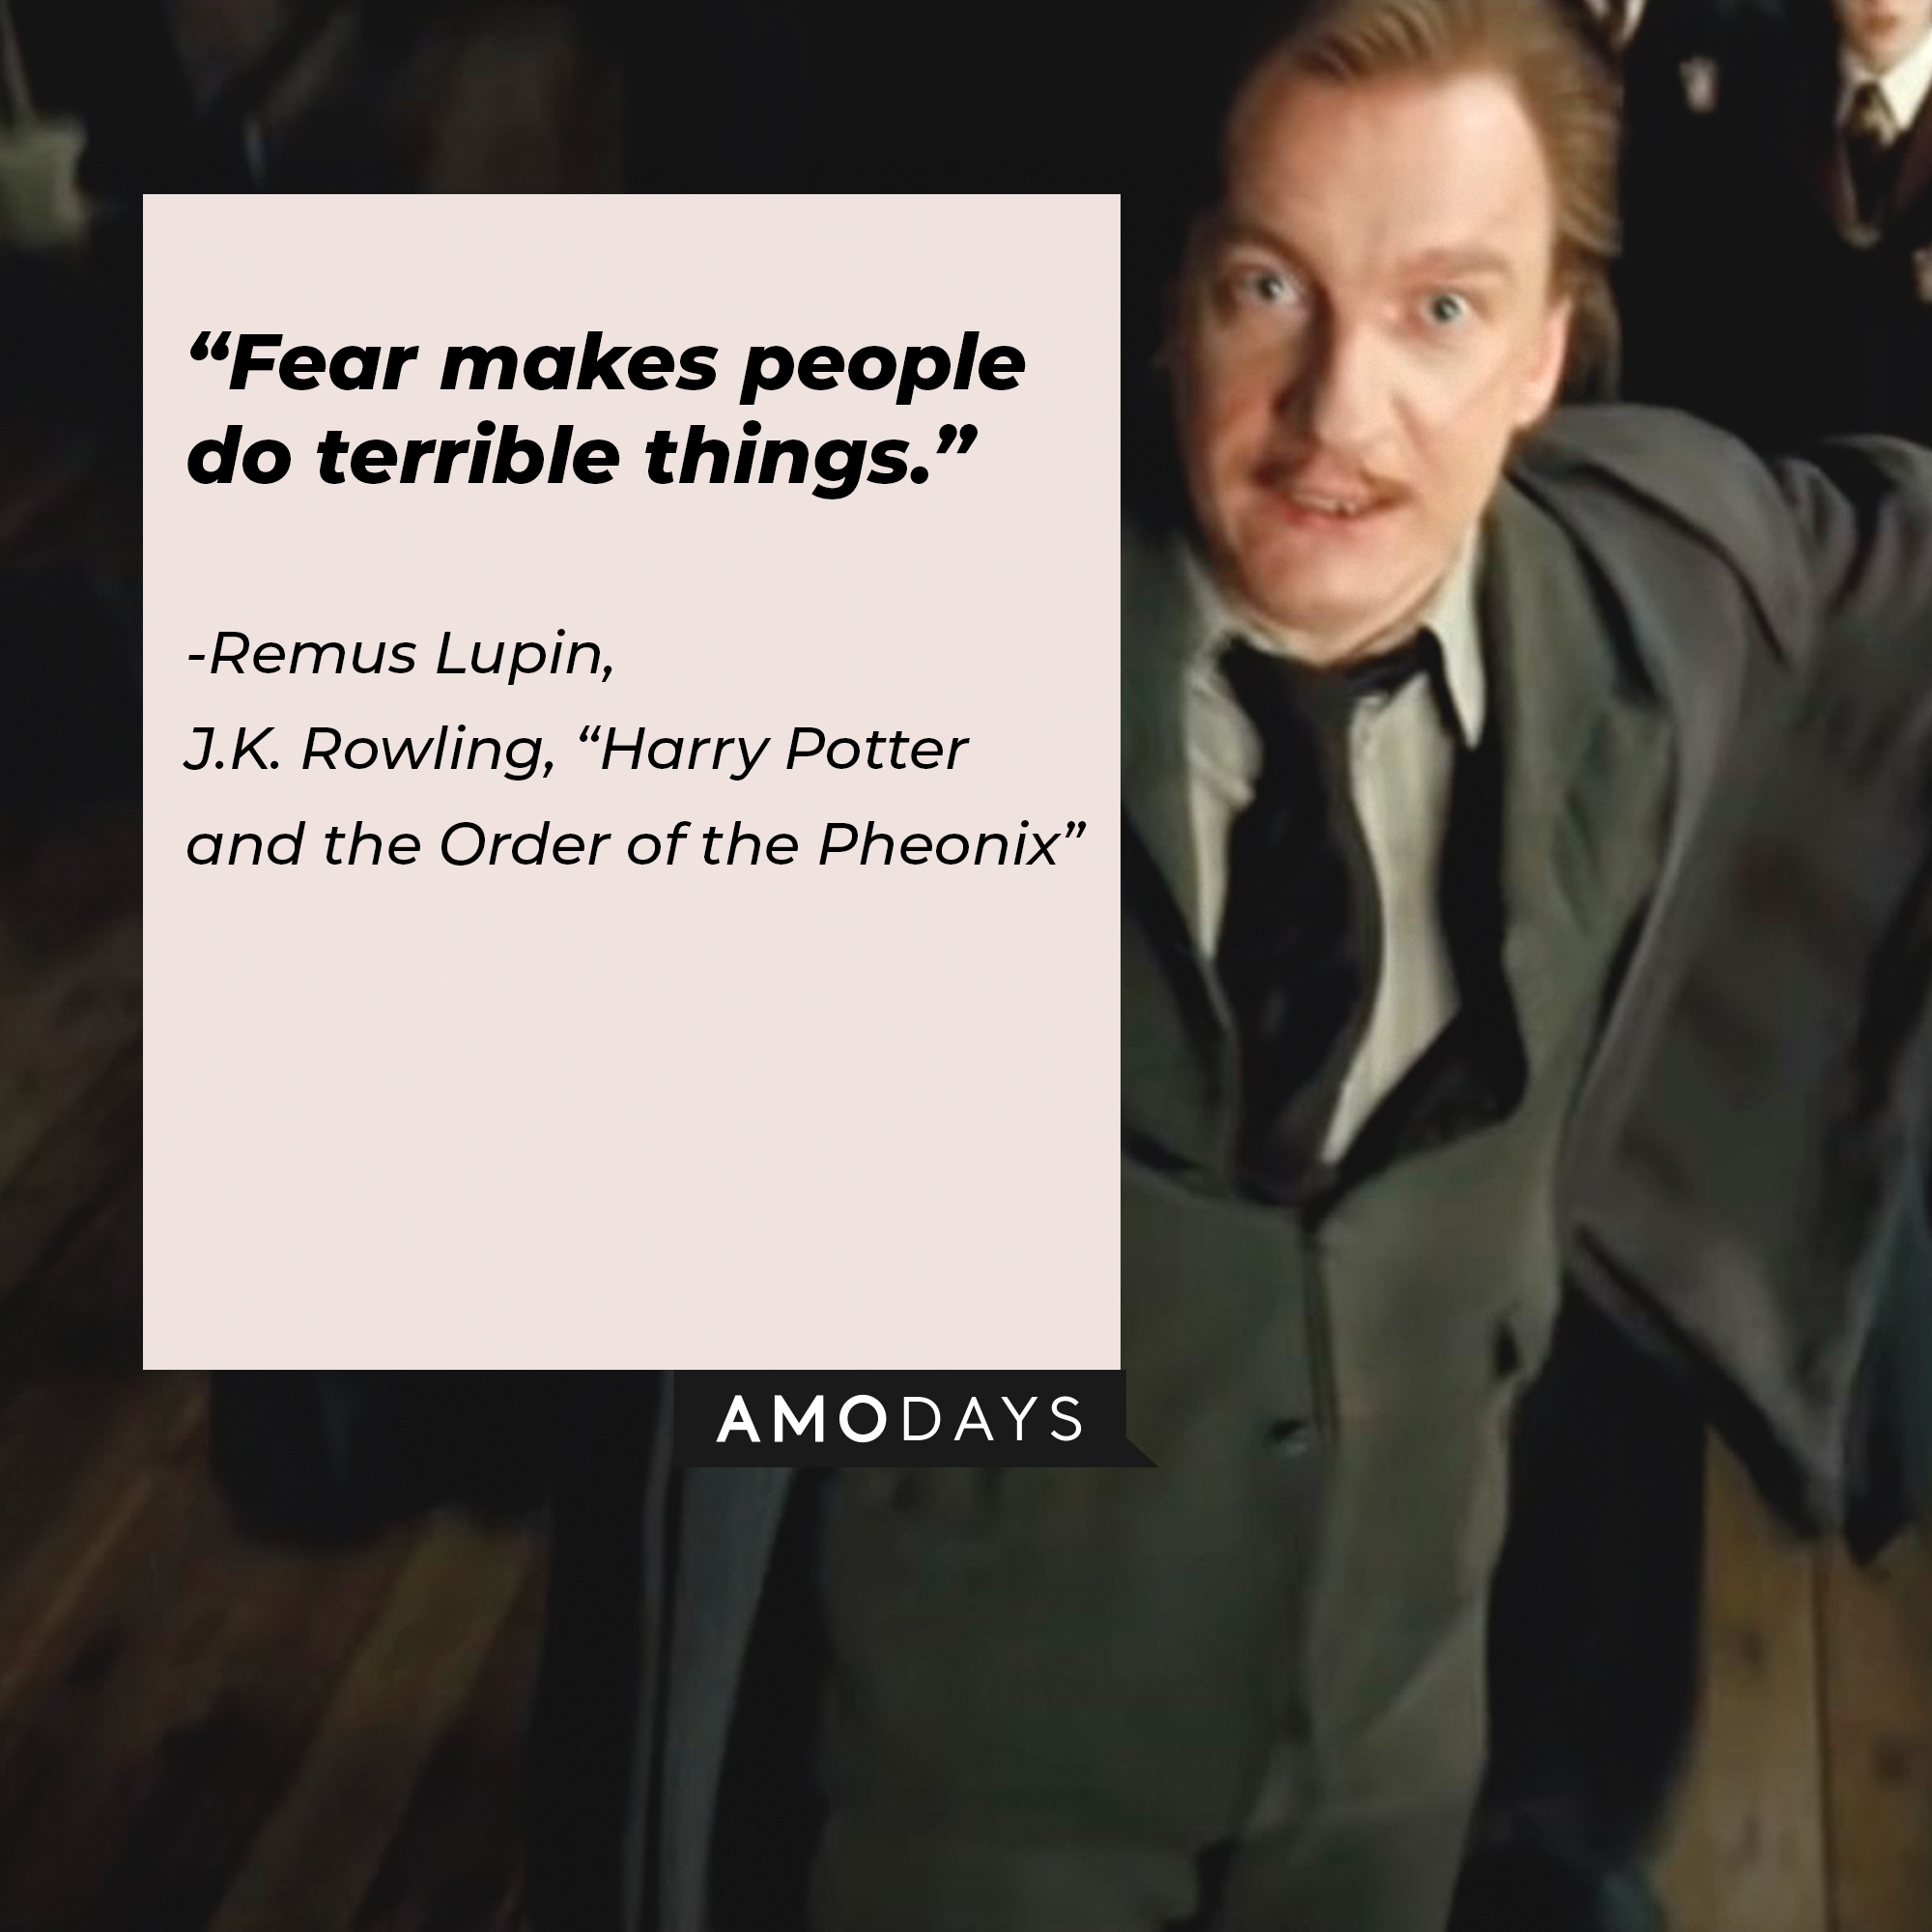 A picture of Remus Lupin with his quote: “Fear makes people do terrible things.” | Source: youtube.com/WarnerBrosPictures